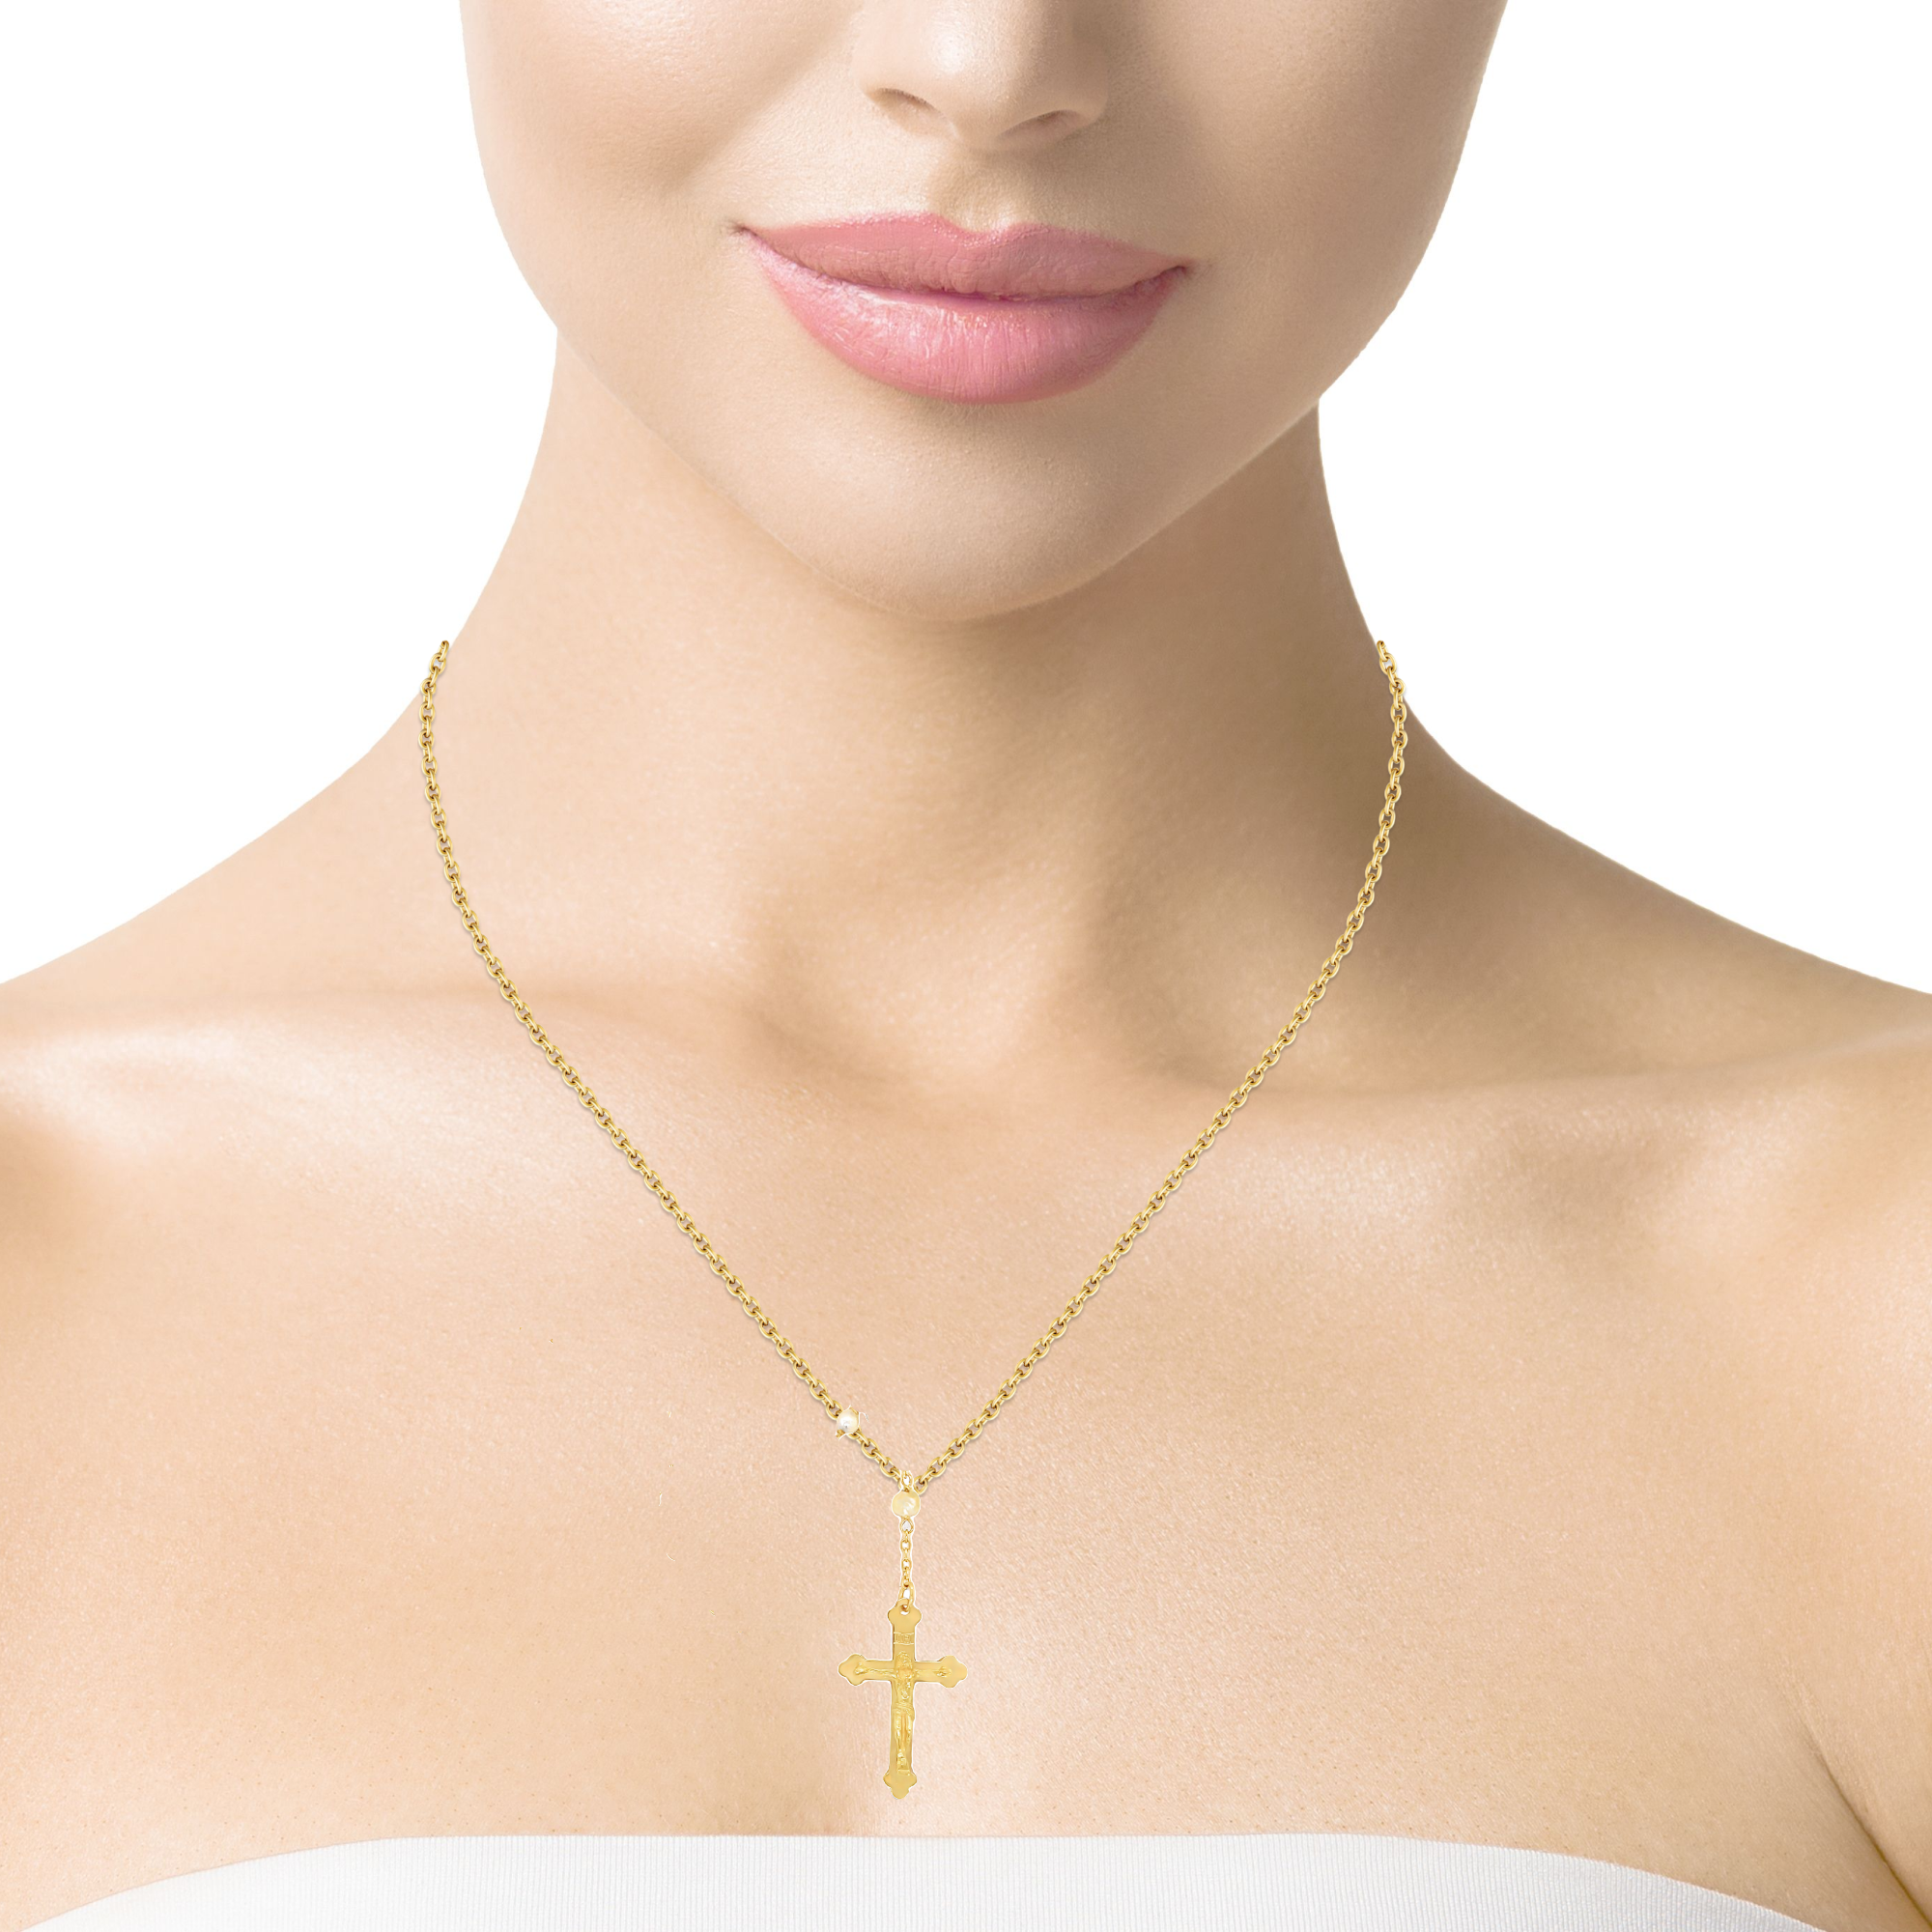 Constructed from 18K yellow gold, this exquisite Italian-crafted rosary necklace features 3.00mm coral beads sourced from Corsica, a matte finished Virgin medallion and a high-polished crucifix. Measuring 29" in length, it is finished with a Cross charm.